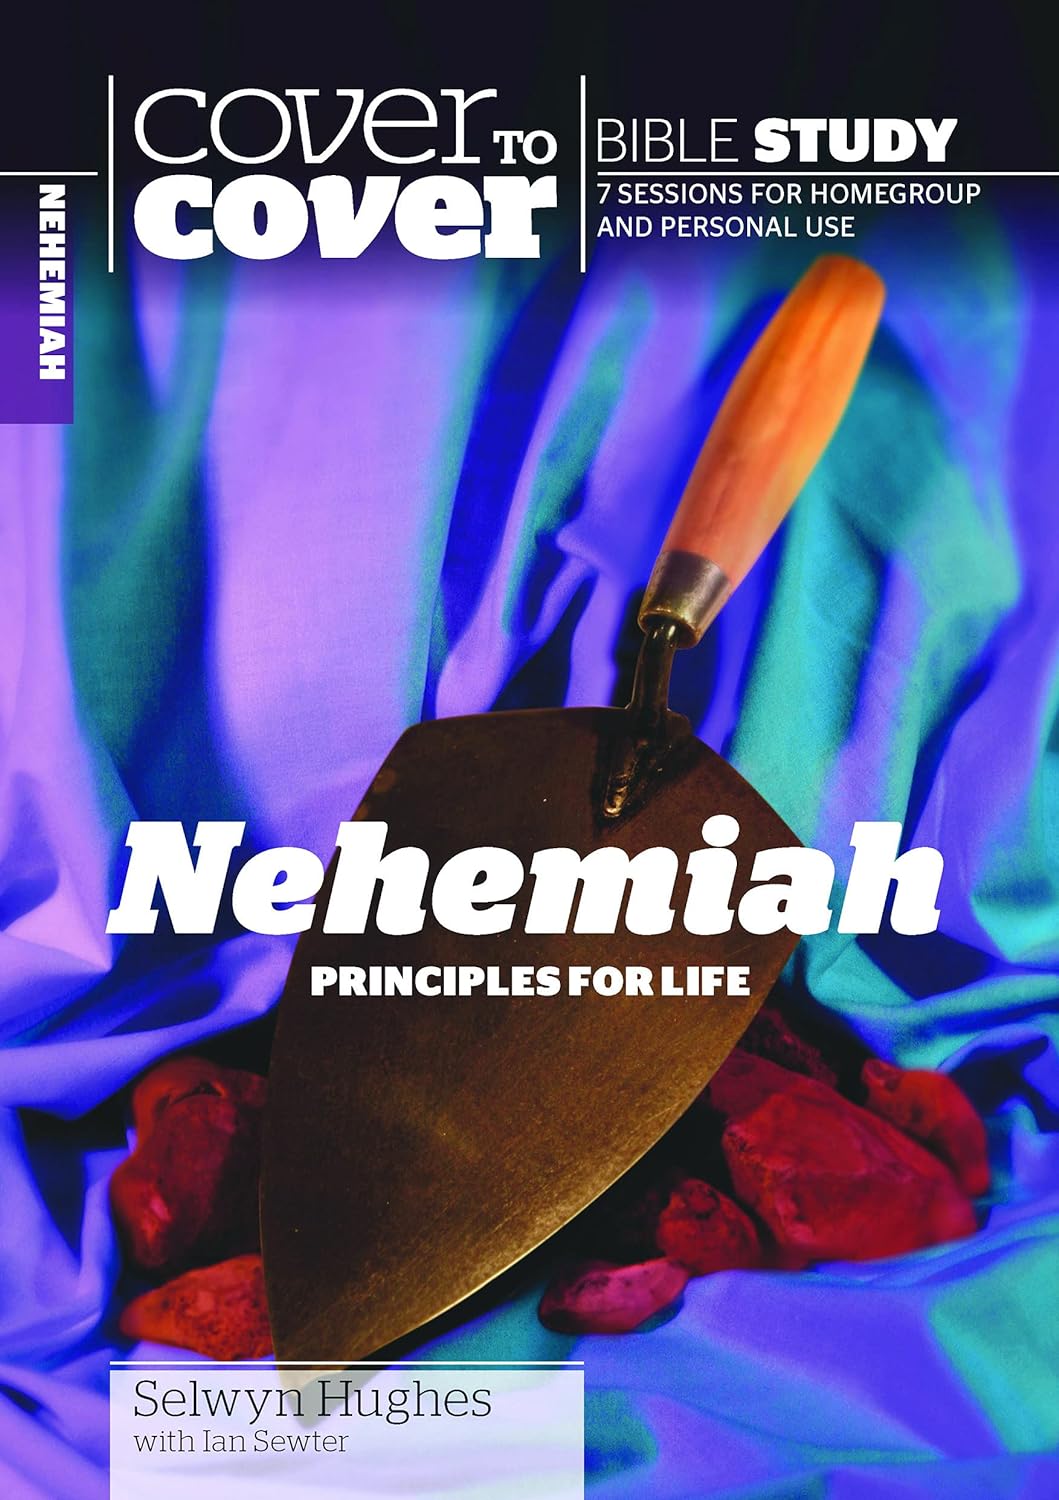 Nehemiah: Principles for Life - Cover to Cover Bible Study Guide